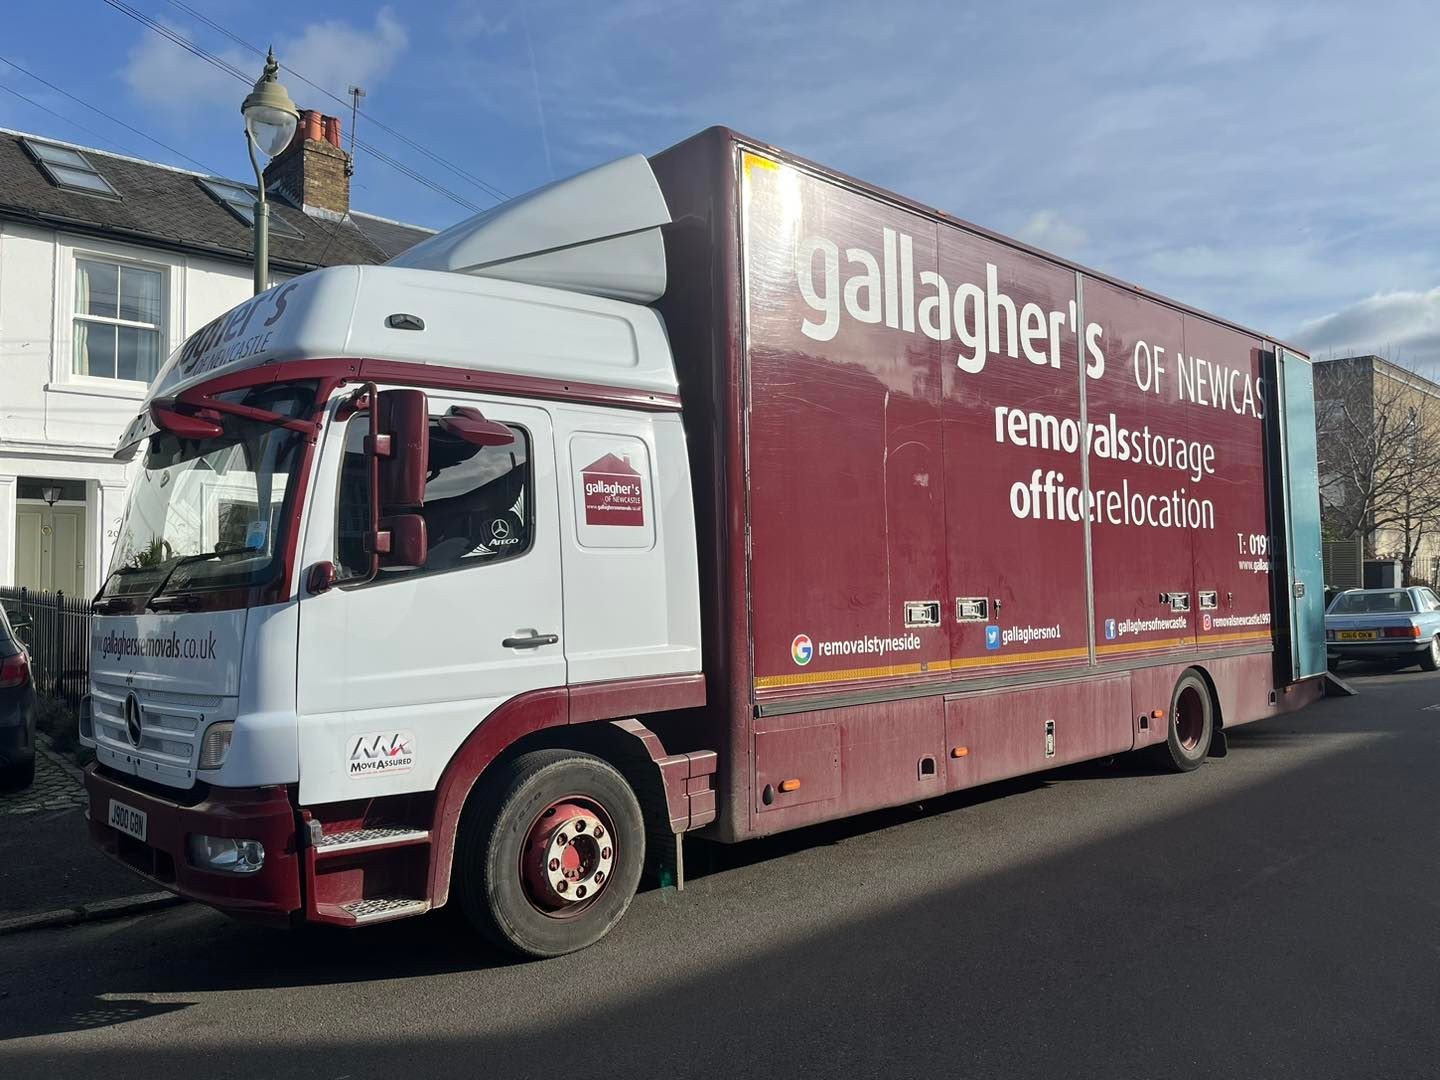 Gallagher's of Newcastle 